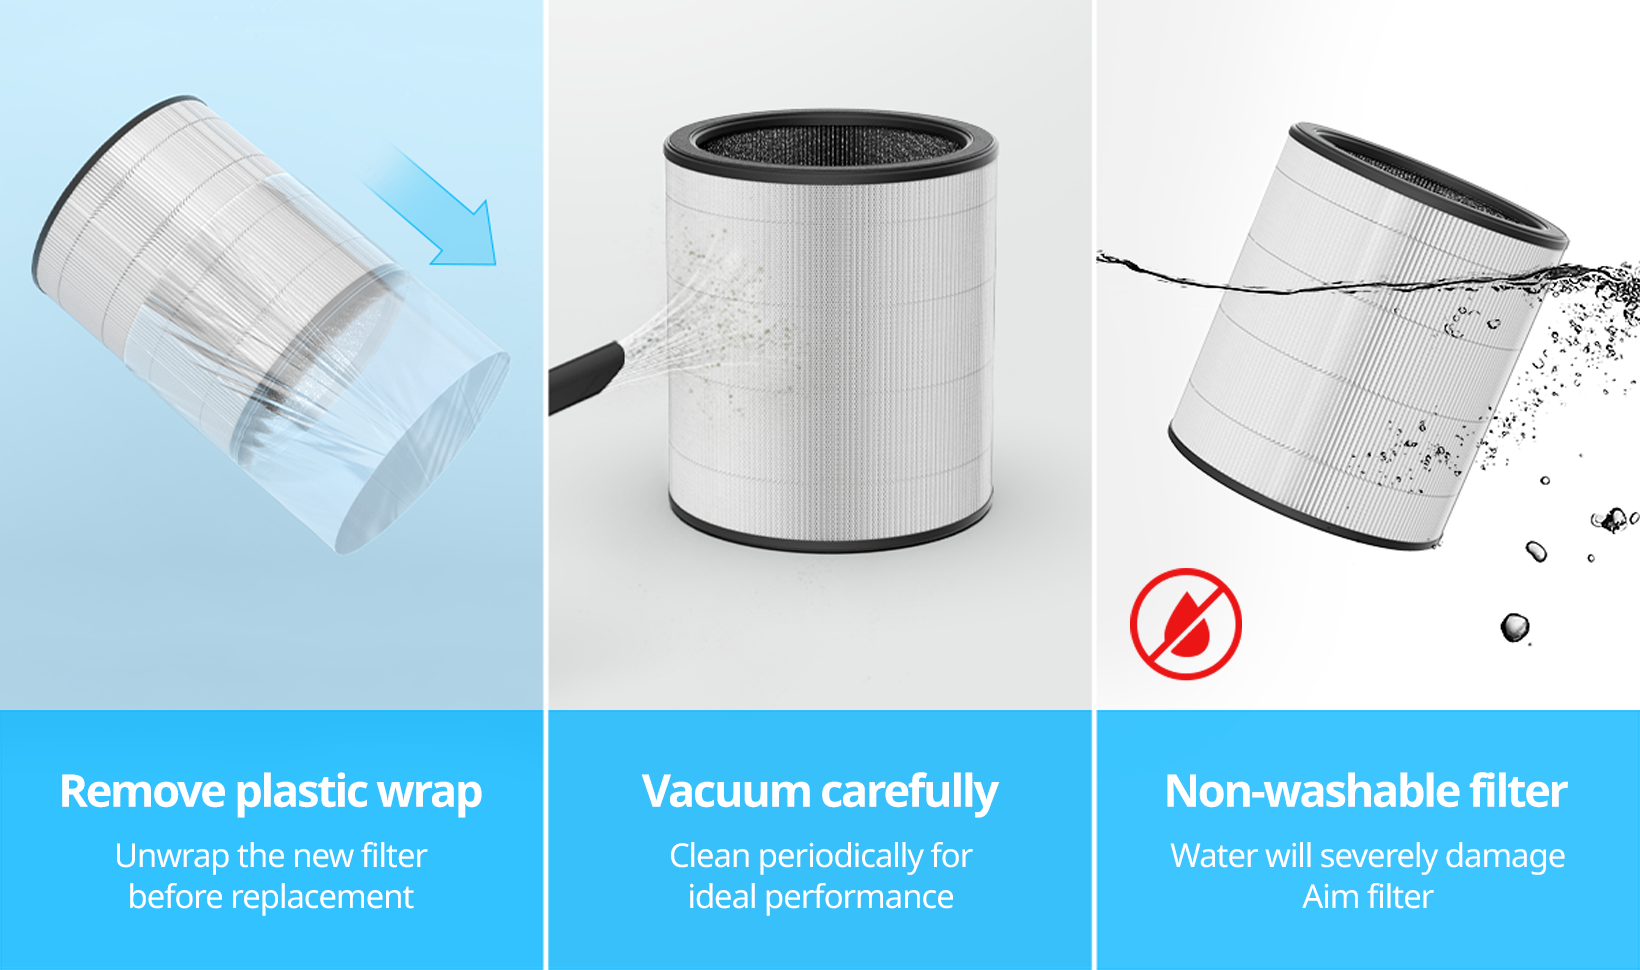 Remove plastic wrap and vacuum carefully. This is non-washable Filter.